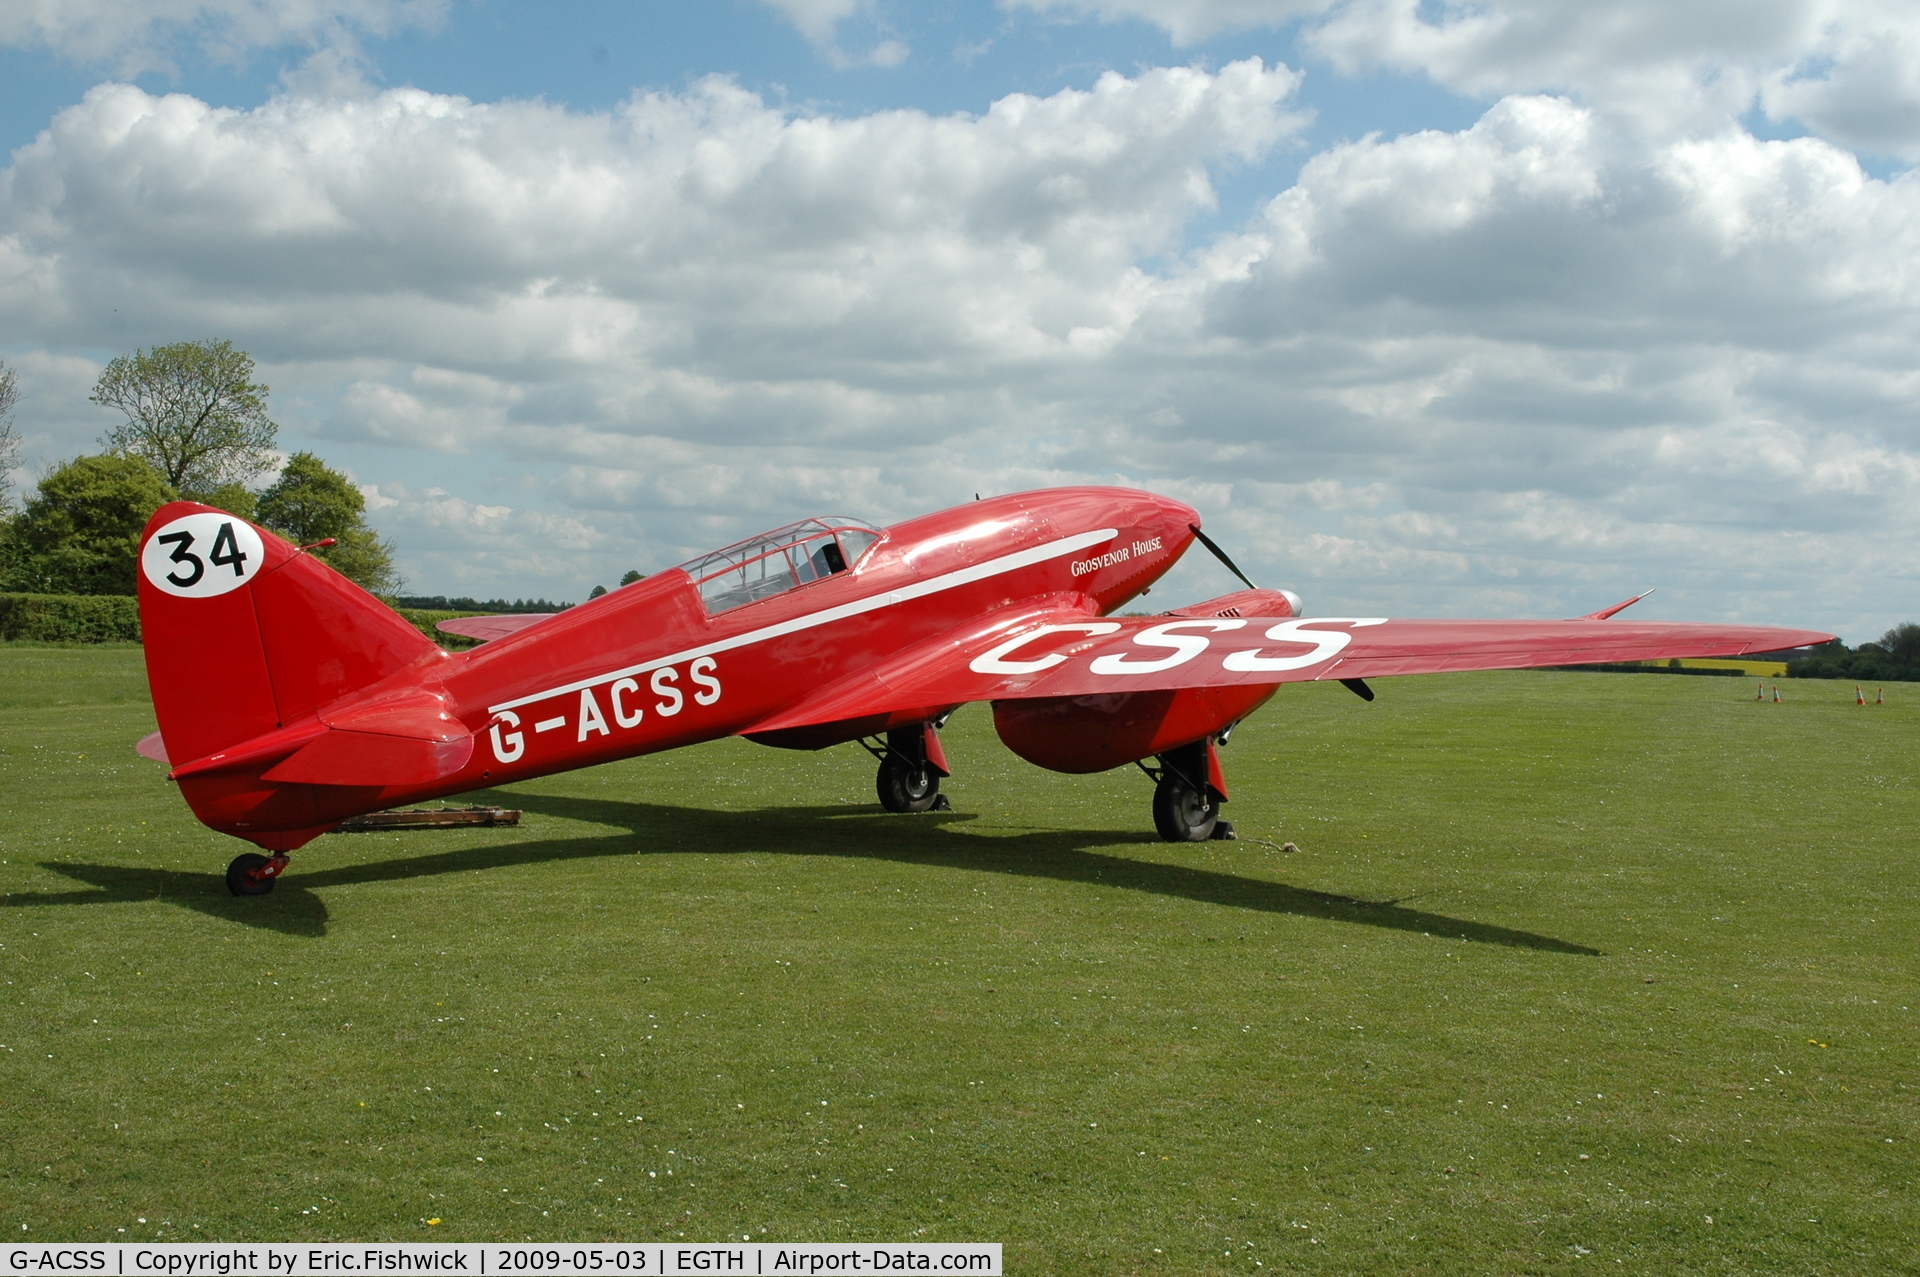 G-ACSS, 1934 De Havilland DH-88 Comet C/N 1996, 2. G-ACSS at the Shuttleworth Collection Spring Air Display.